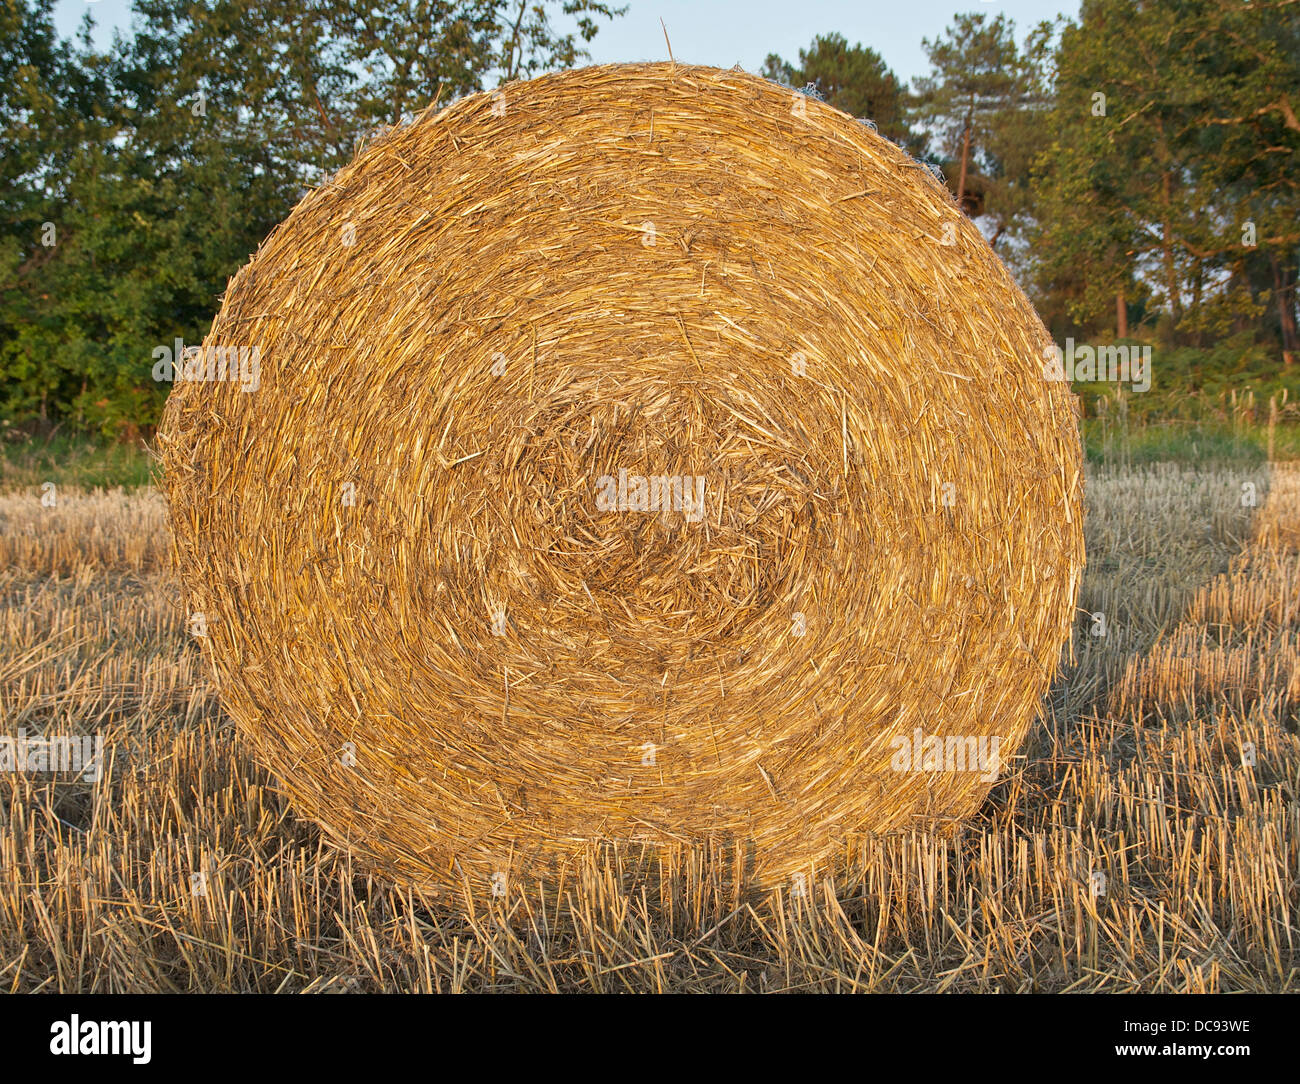 A round straw bale in a field in Dordogne, summer evening light. Stock Photo